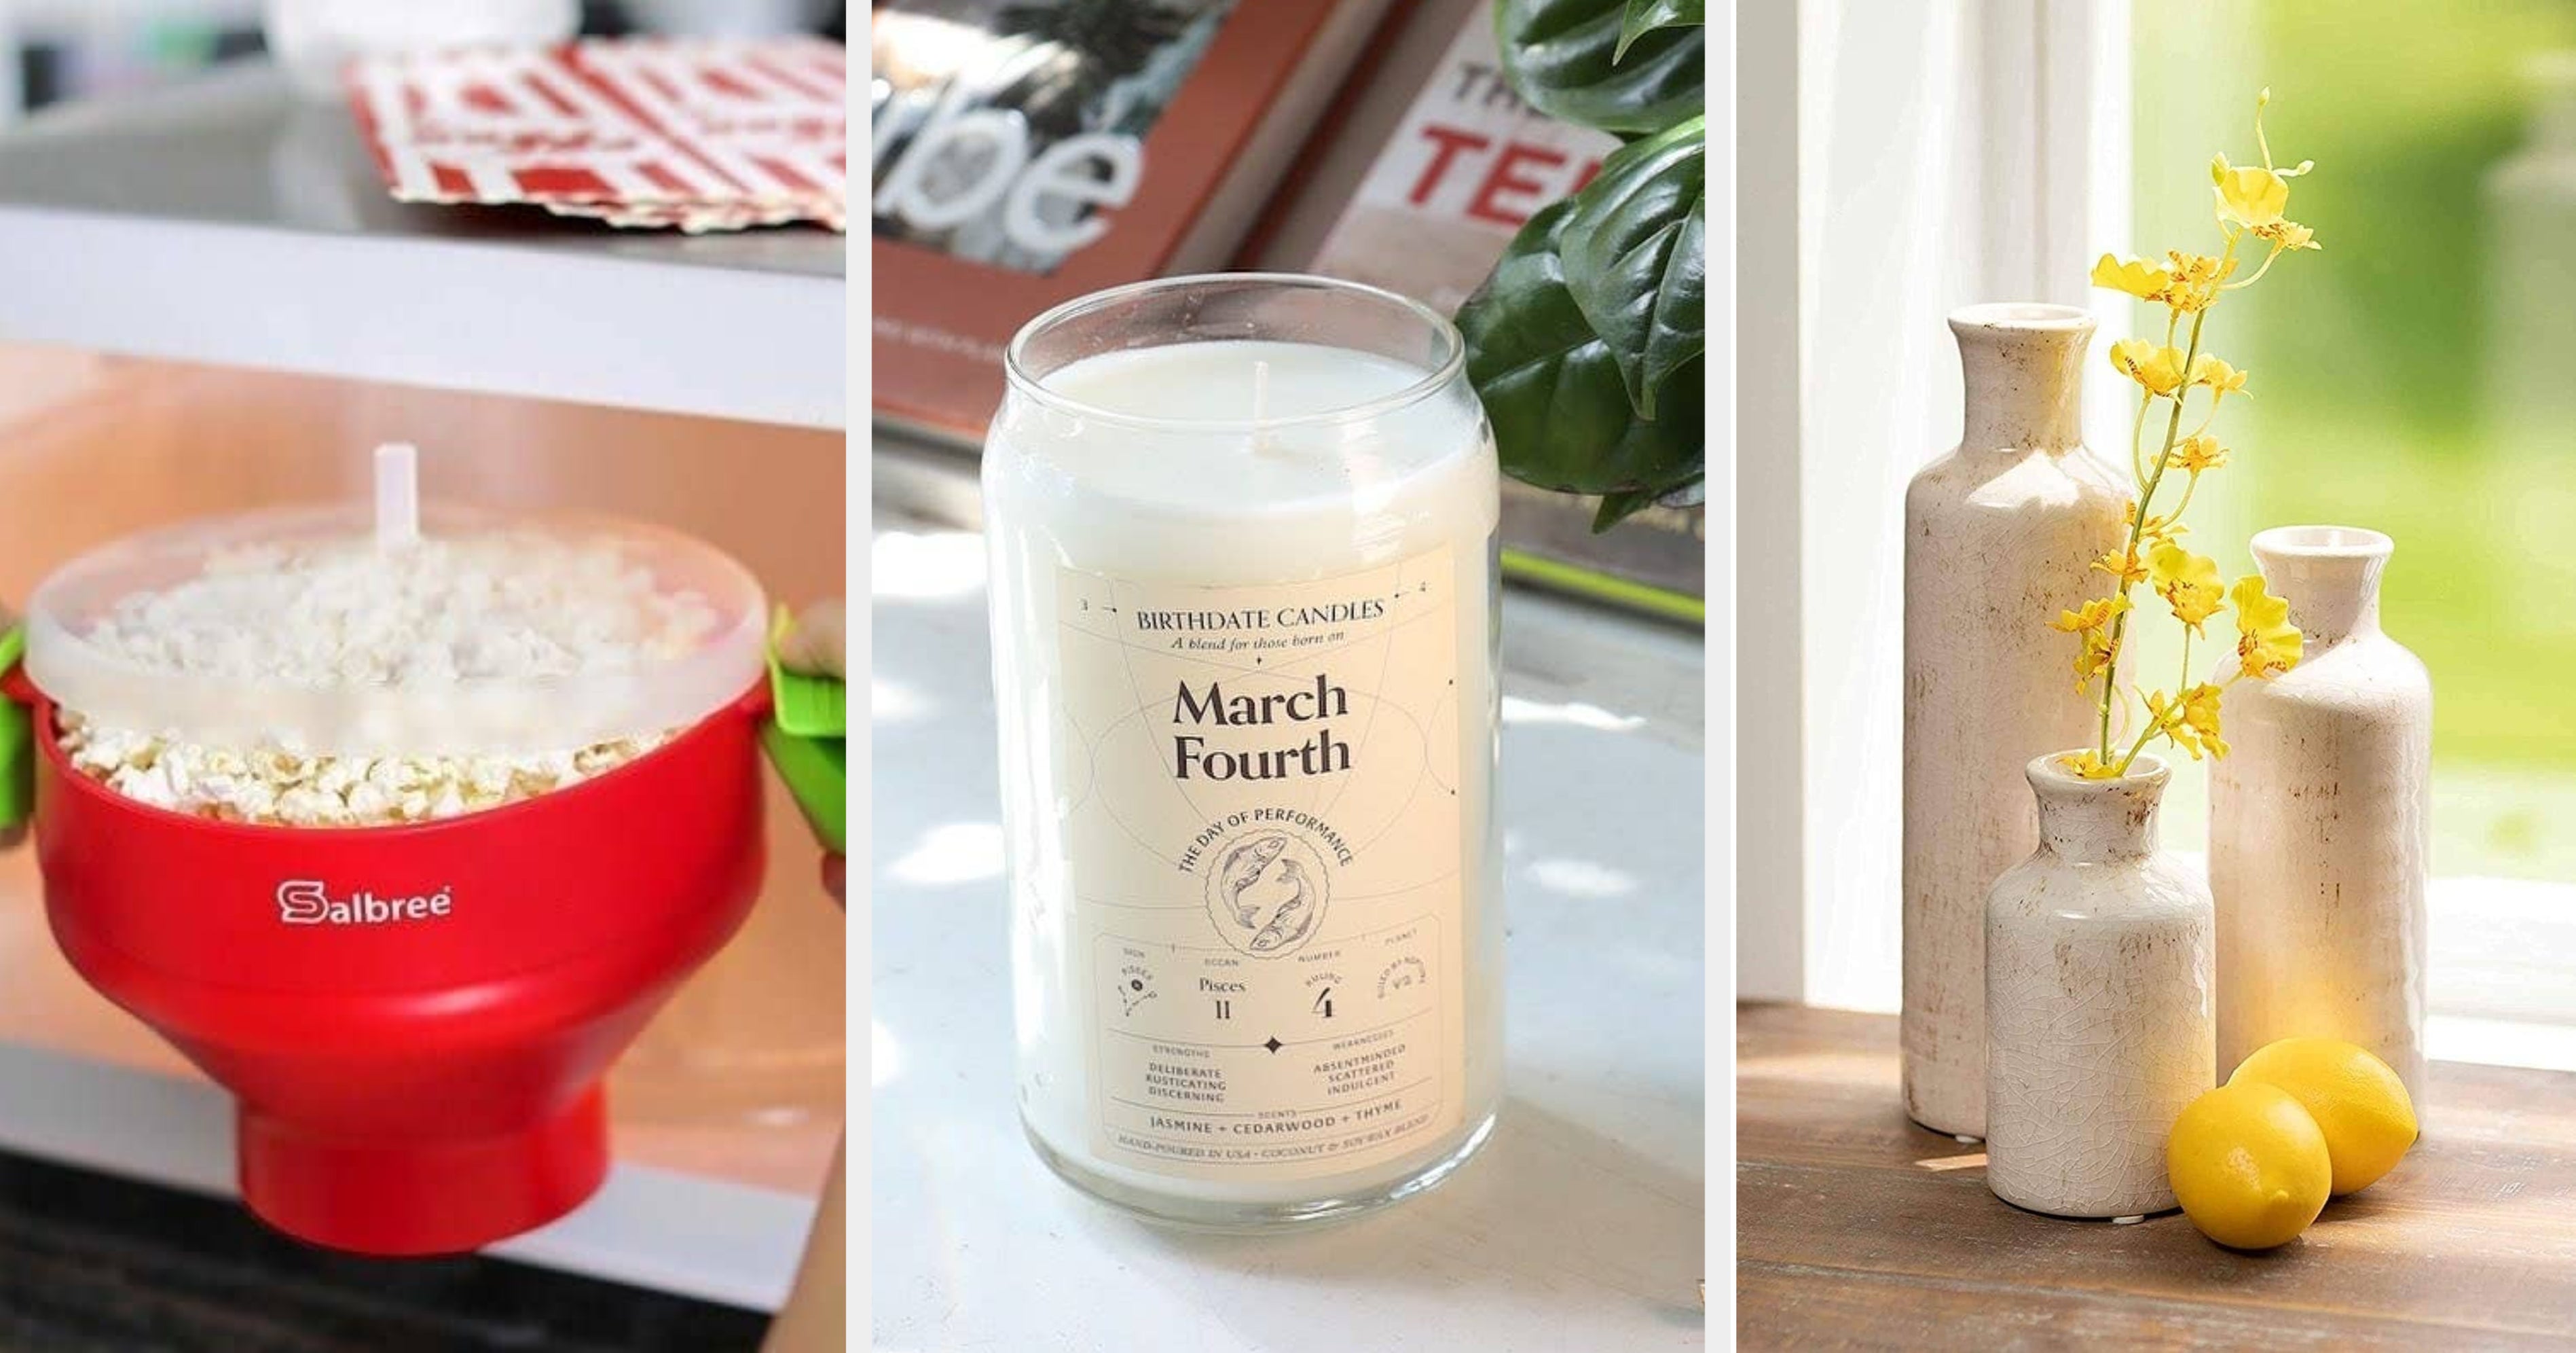 The 7 best gifts under $50 your mom will absolutely love